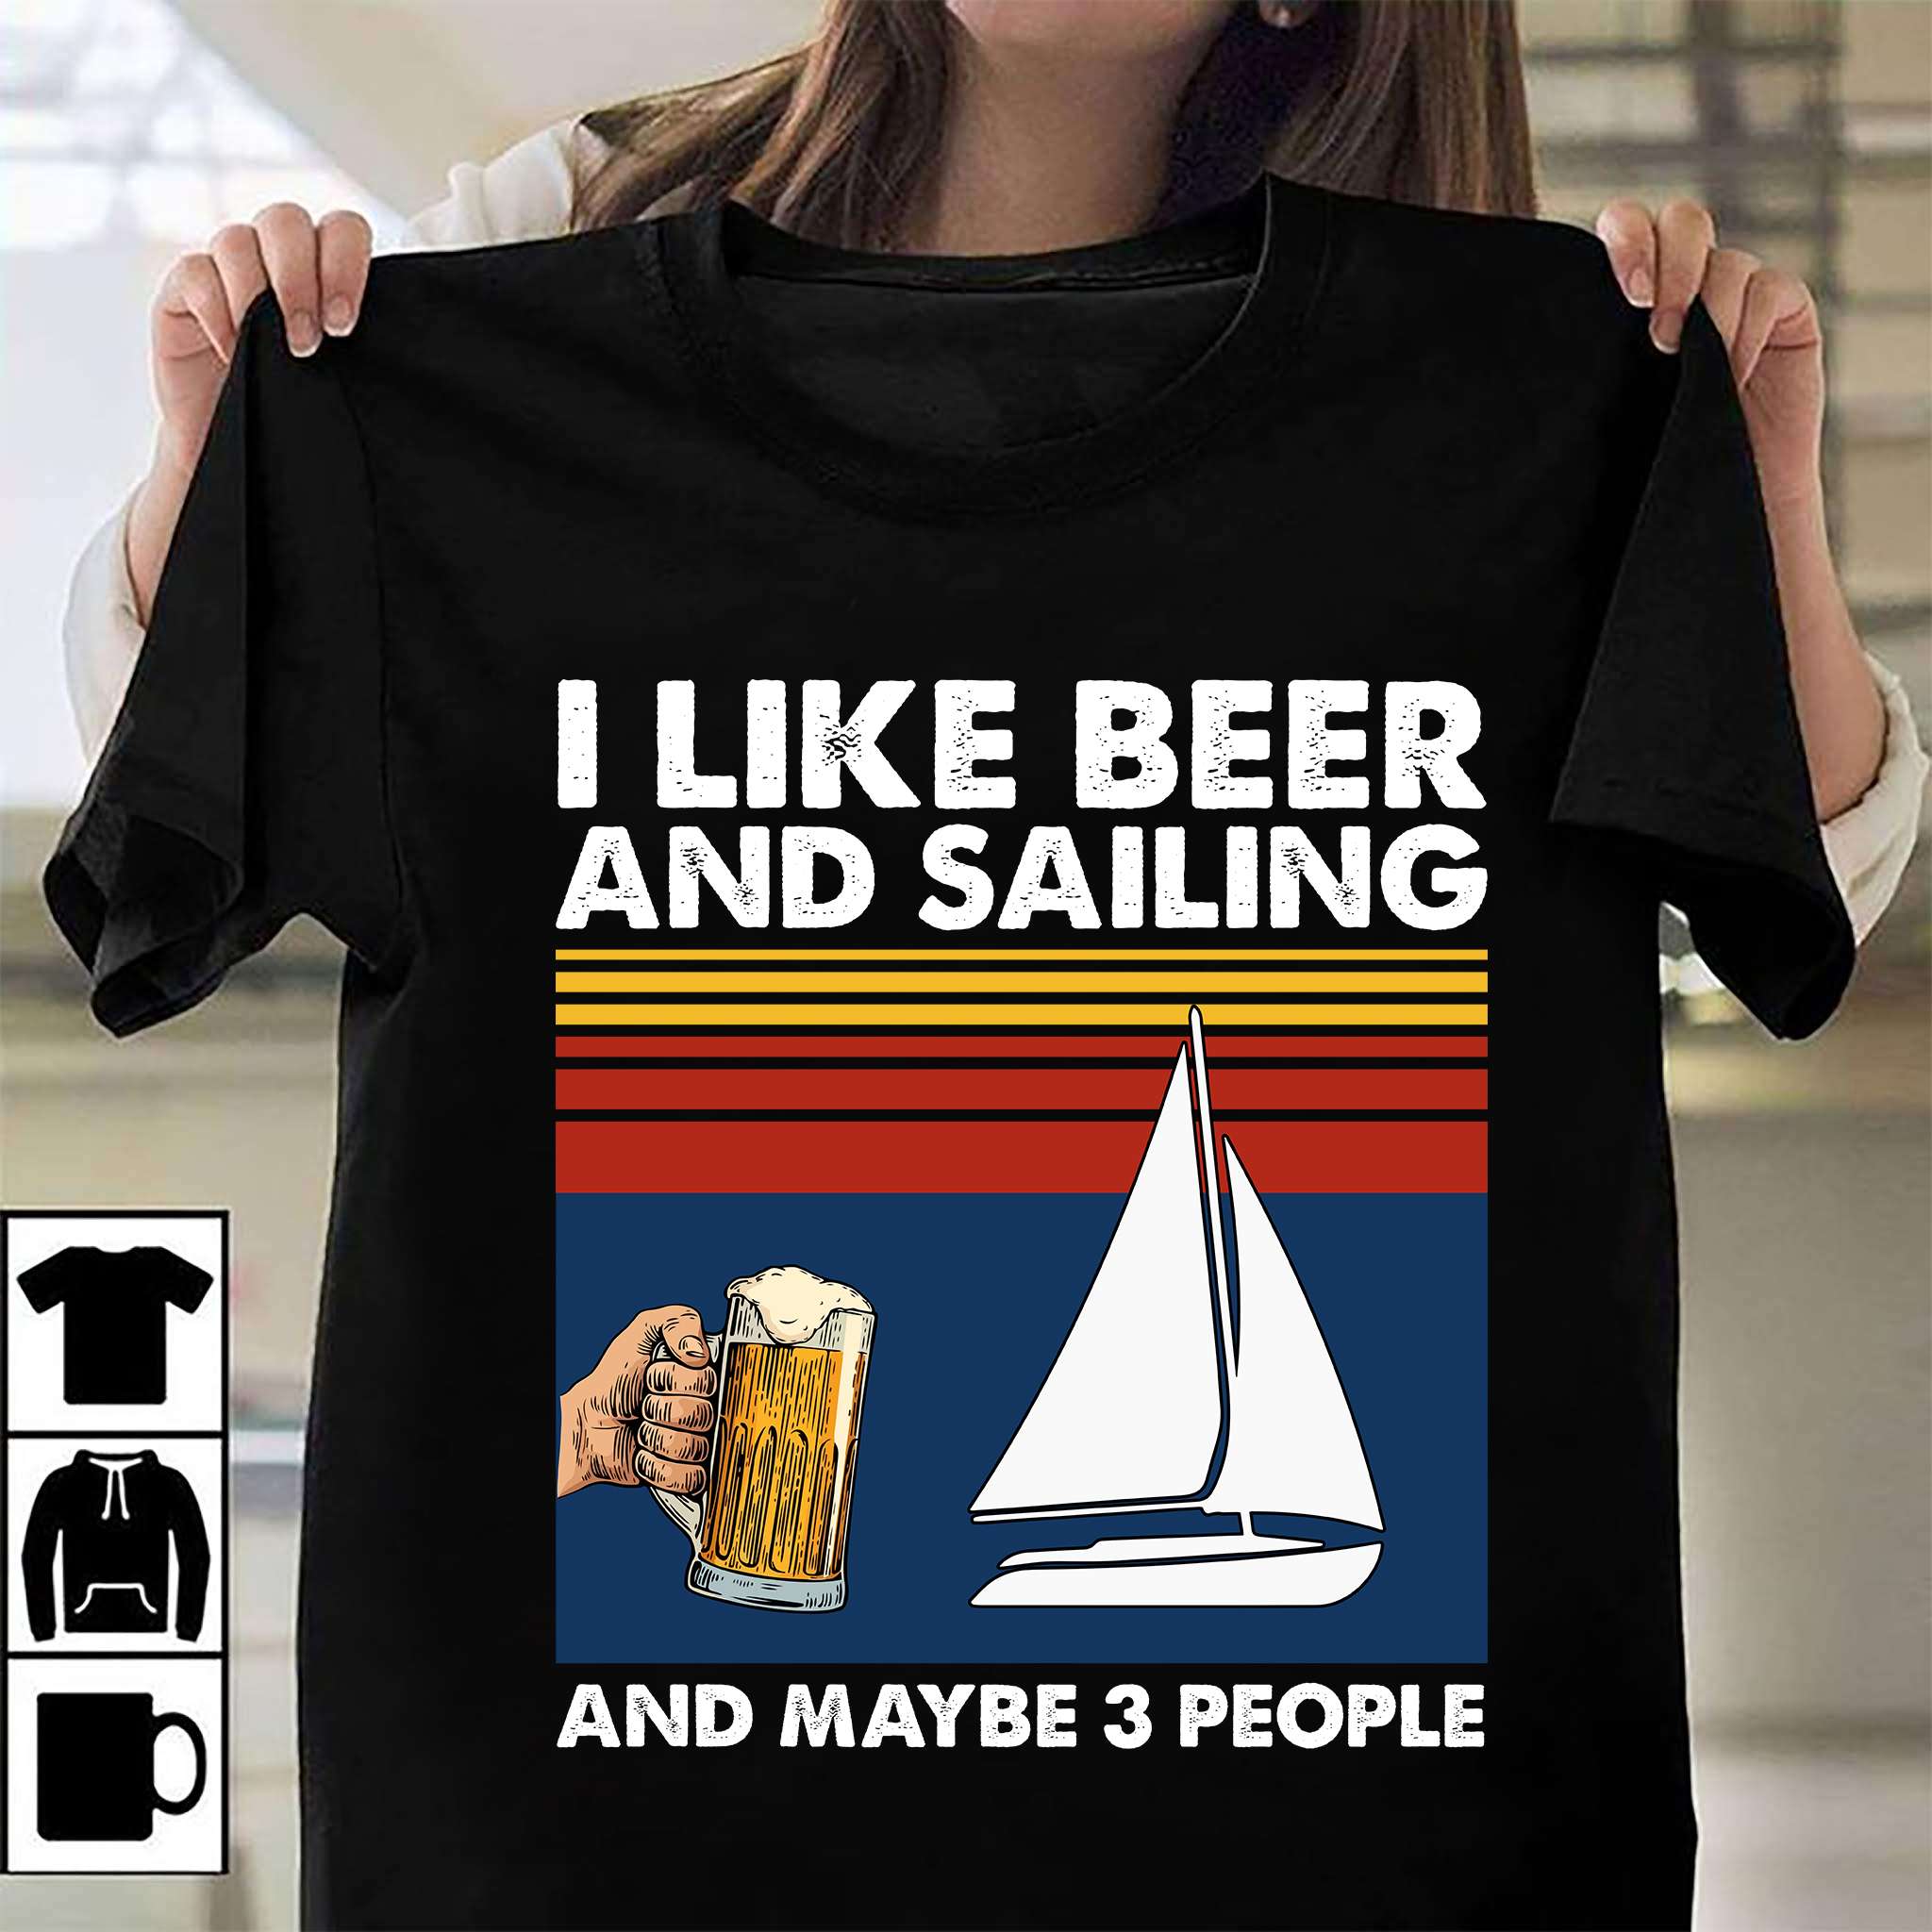 I like beer and sailing and maybe 3 people - Love to go sailing